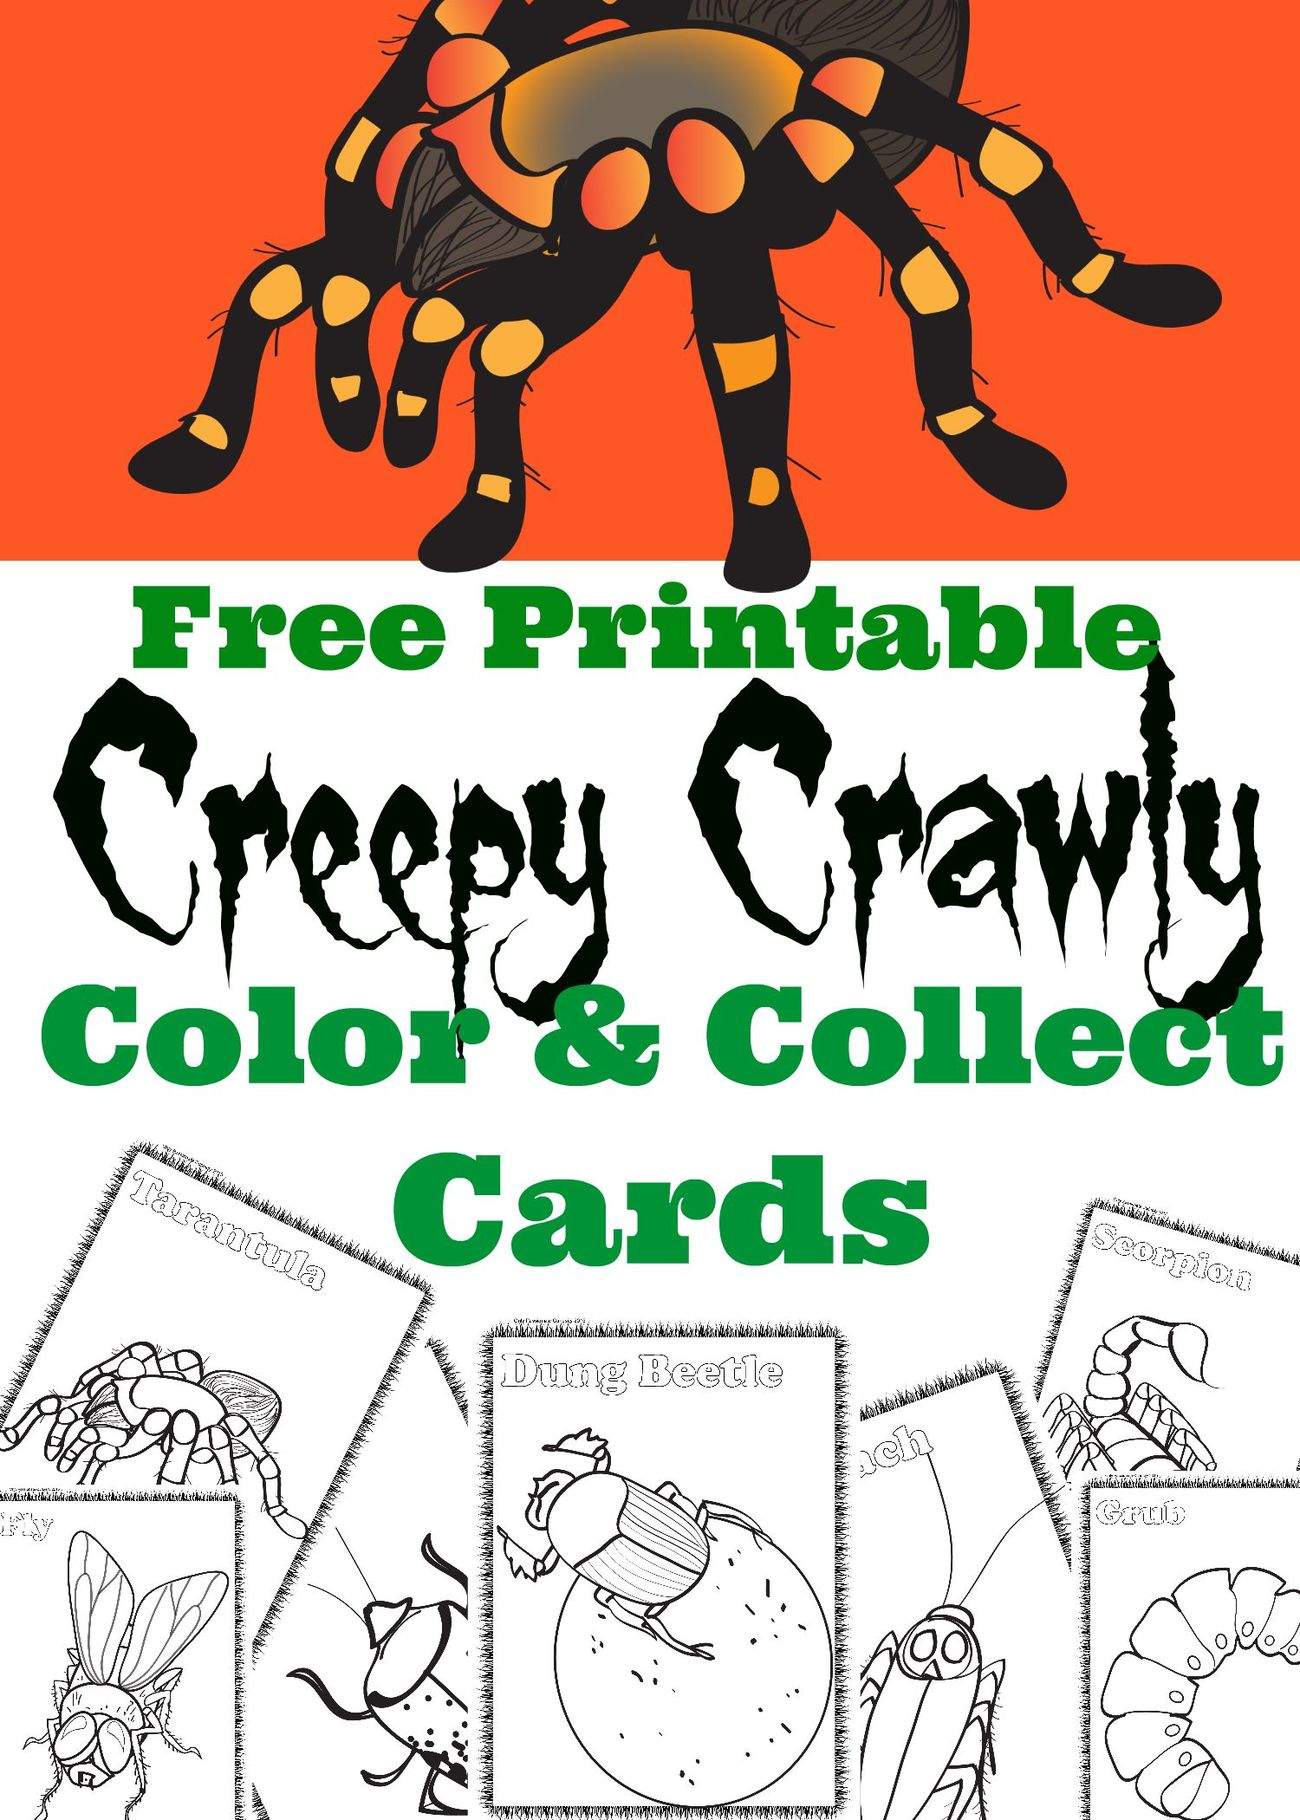 Creepy Crawly Color and Collect Cards